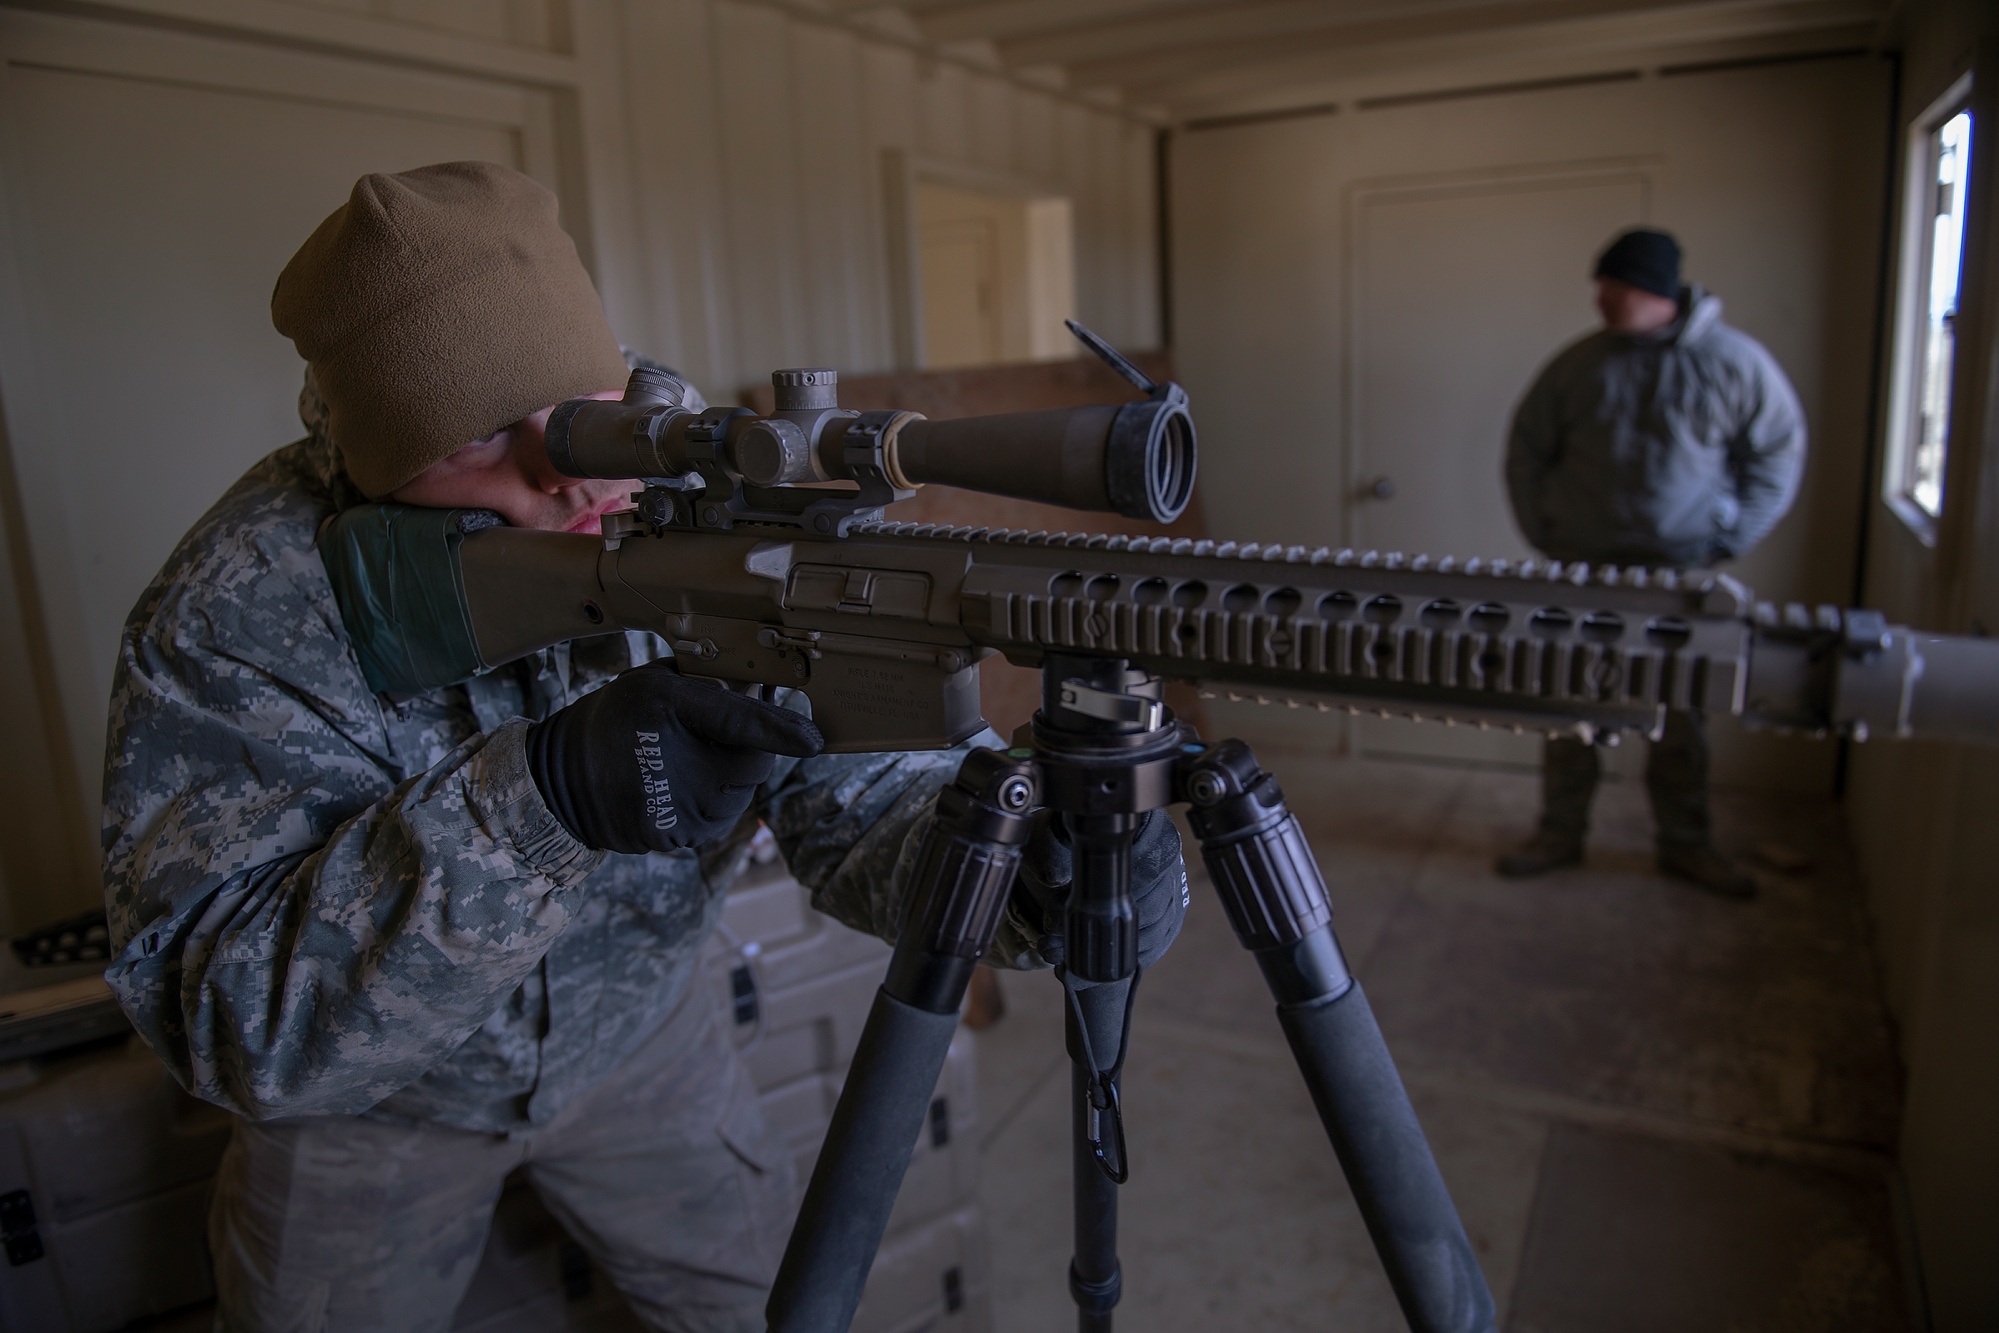 DVIDS - News - Mobile sniper team graduates 24 new 82nd Airborne snipers